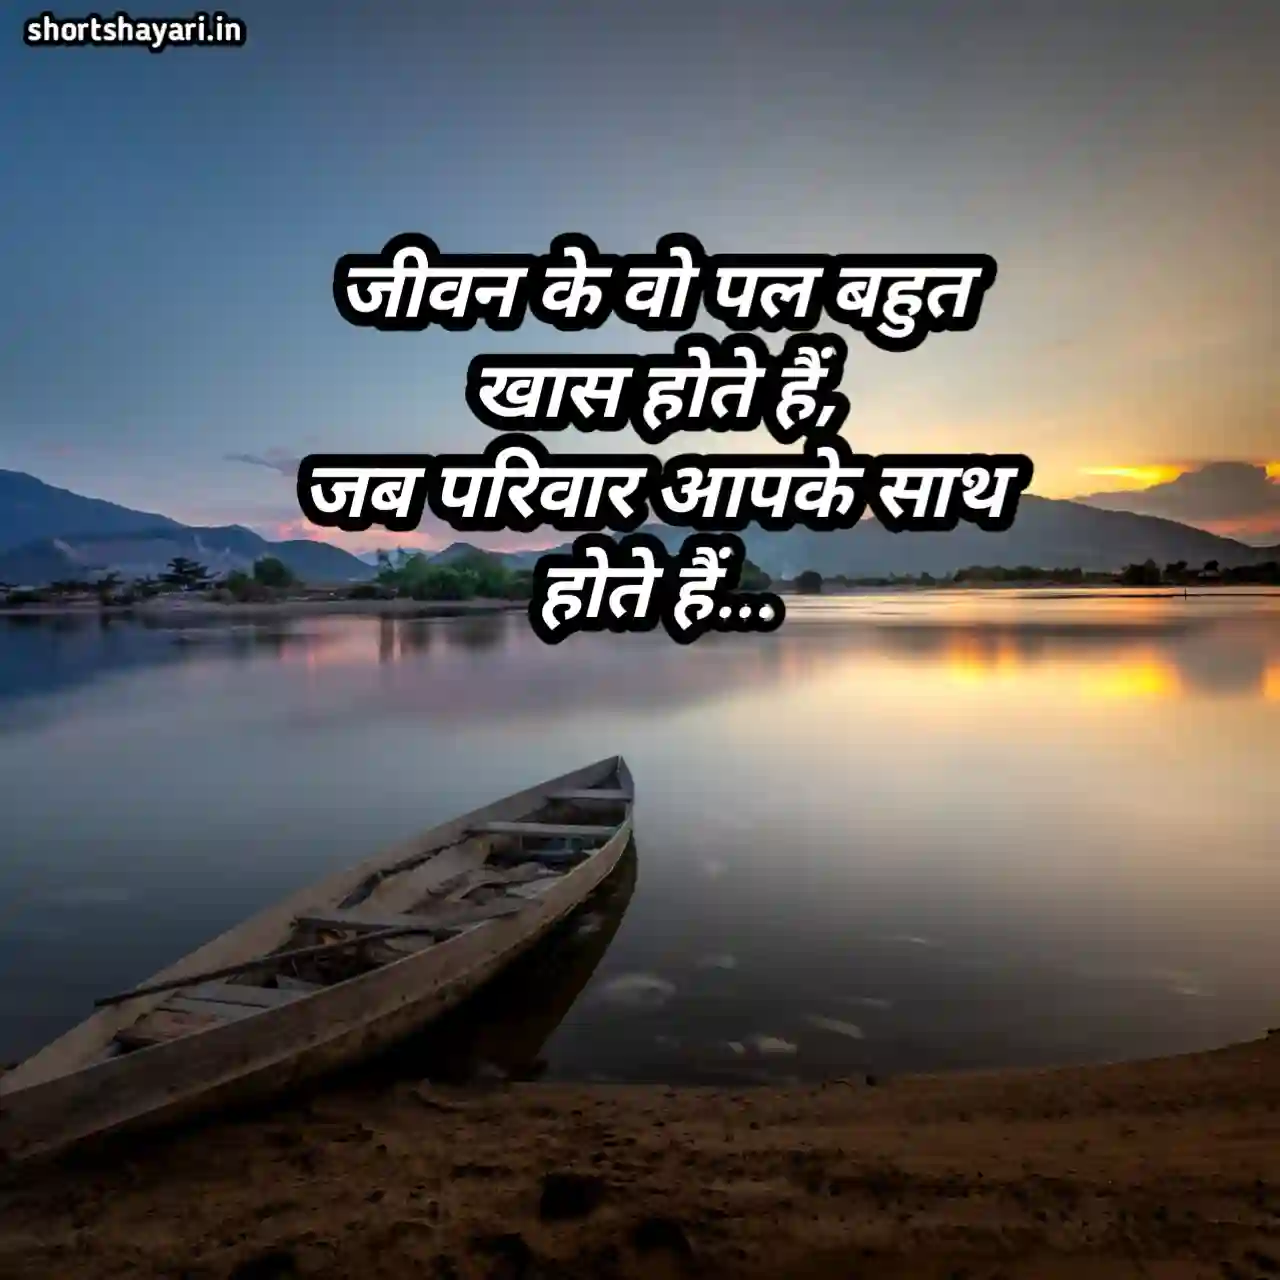 Collection of over 999 Hindi quotes on life with stunning 4K images